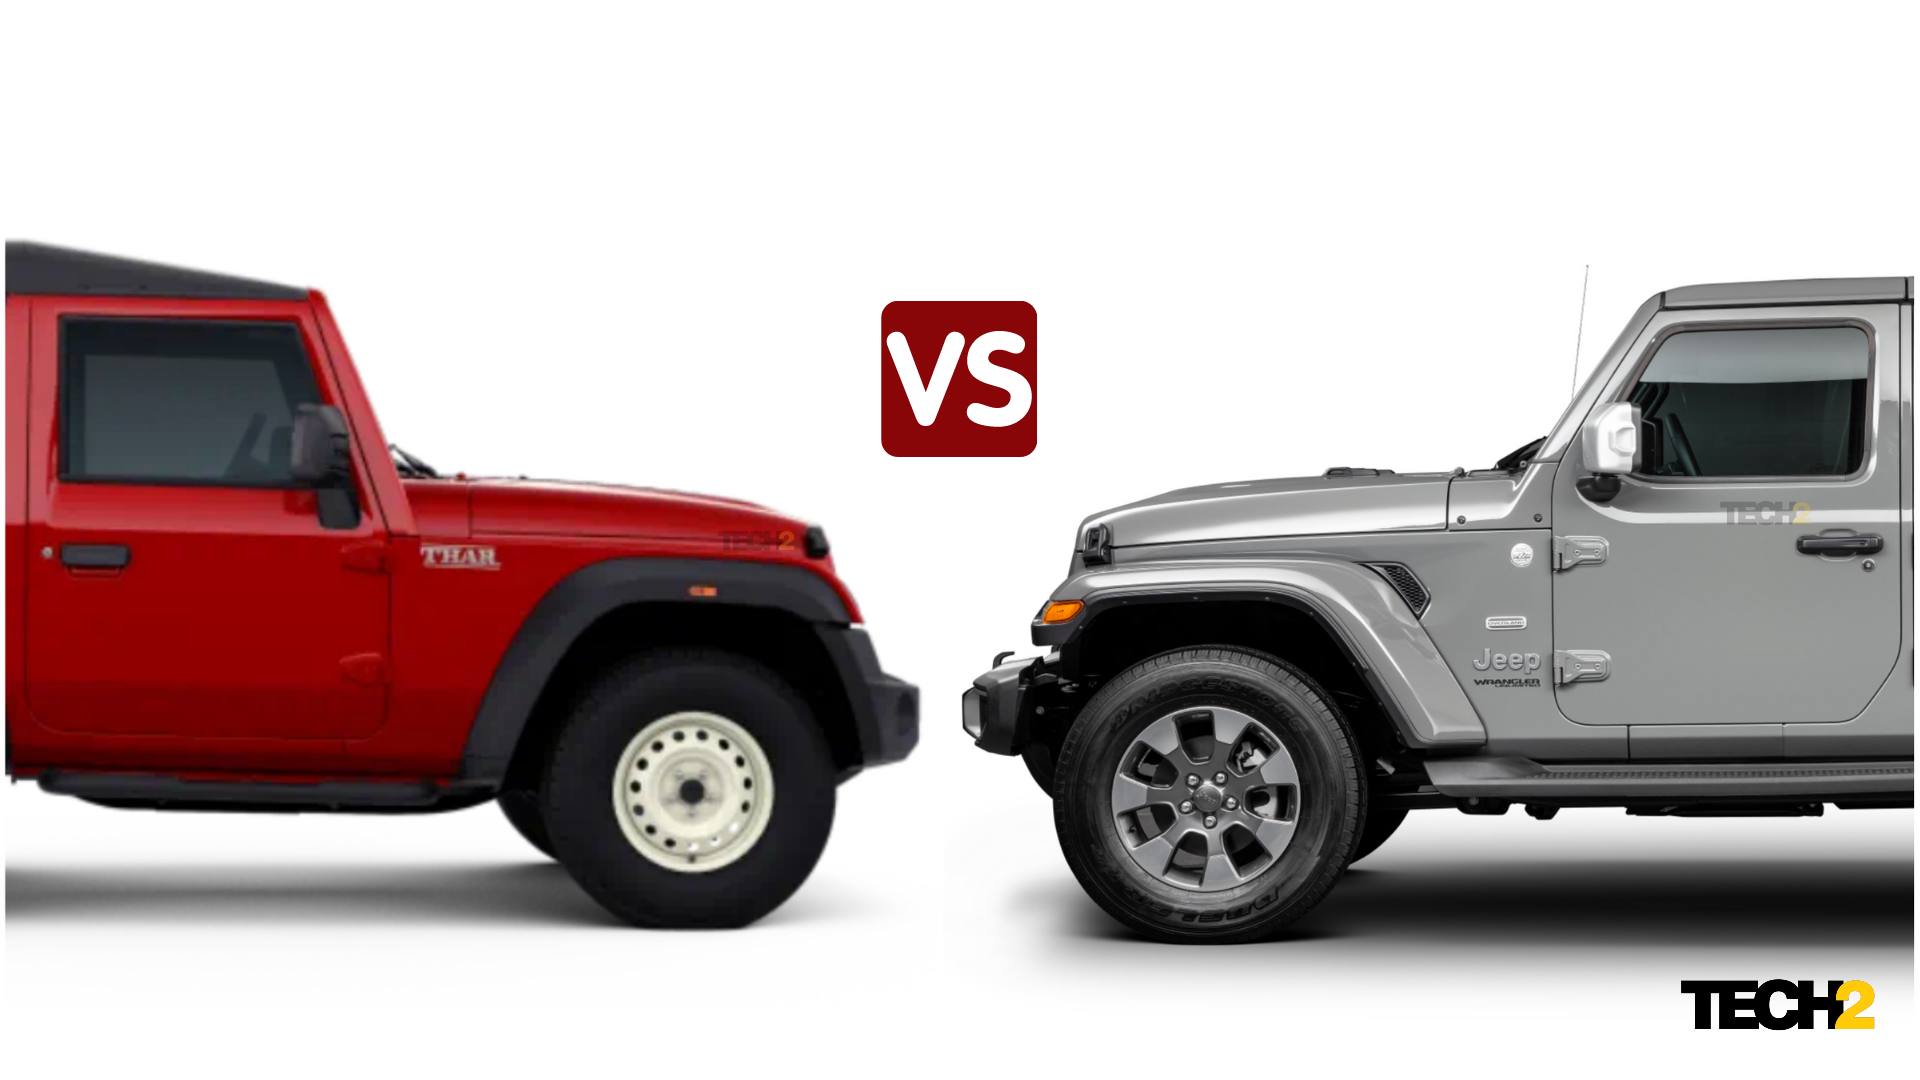 Mahindra agrees to Jeep’s request, but this isn’t over yet- Technology News, Gadgetclock